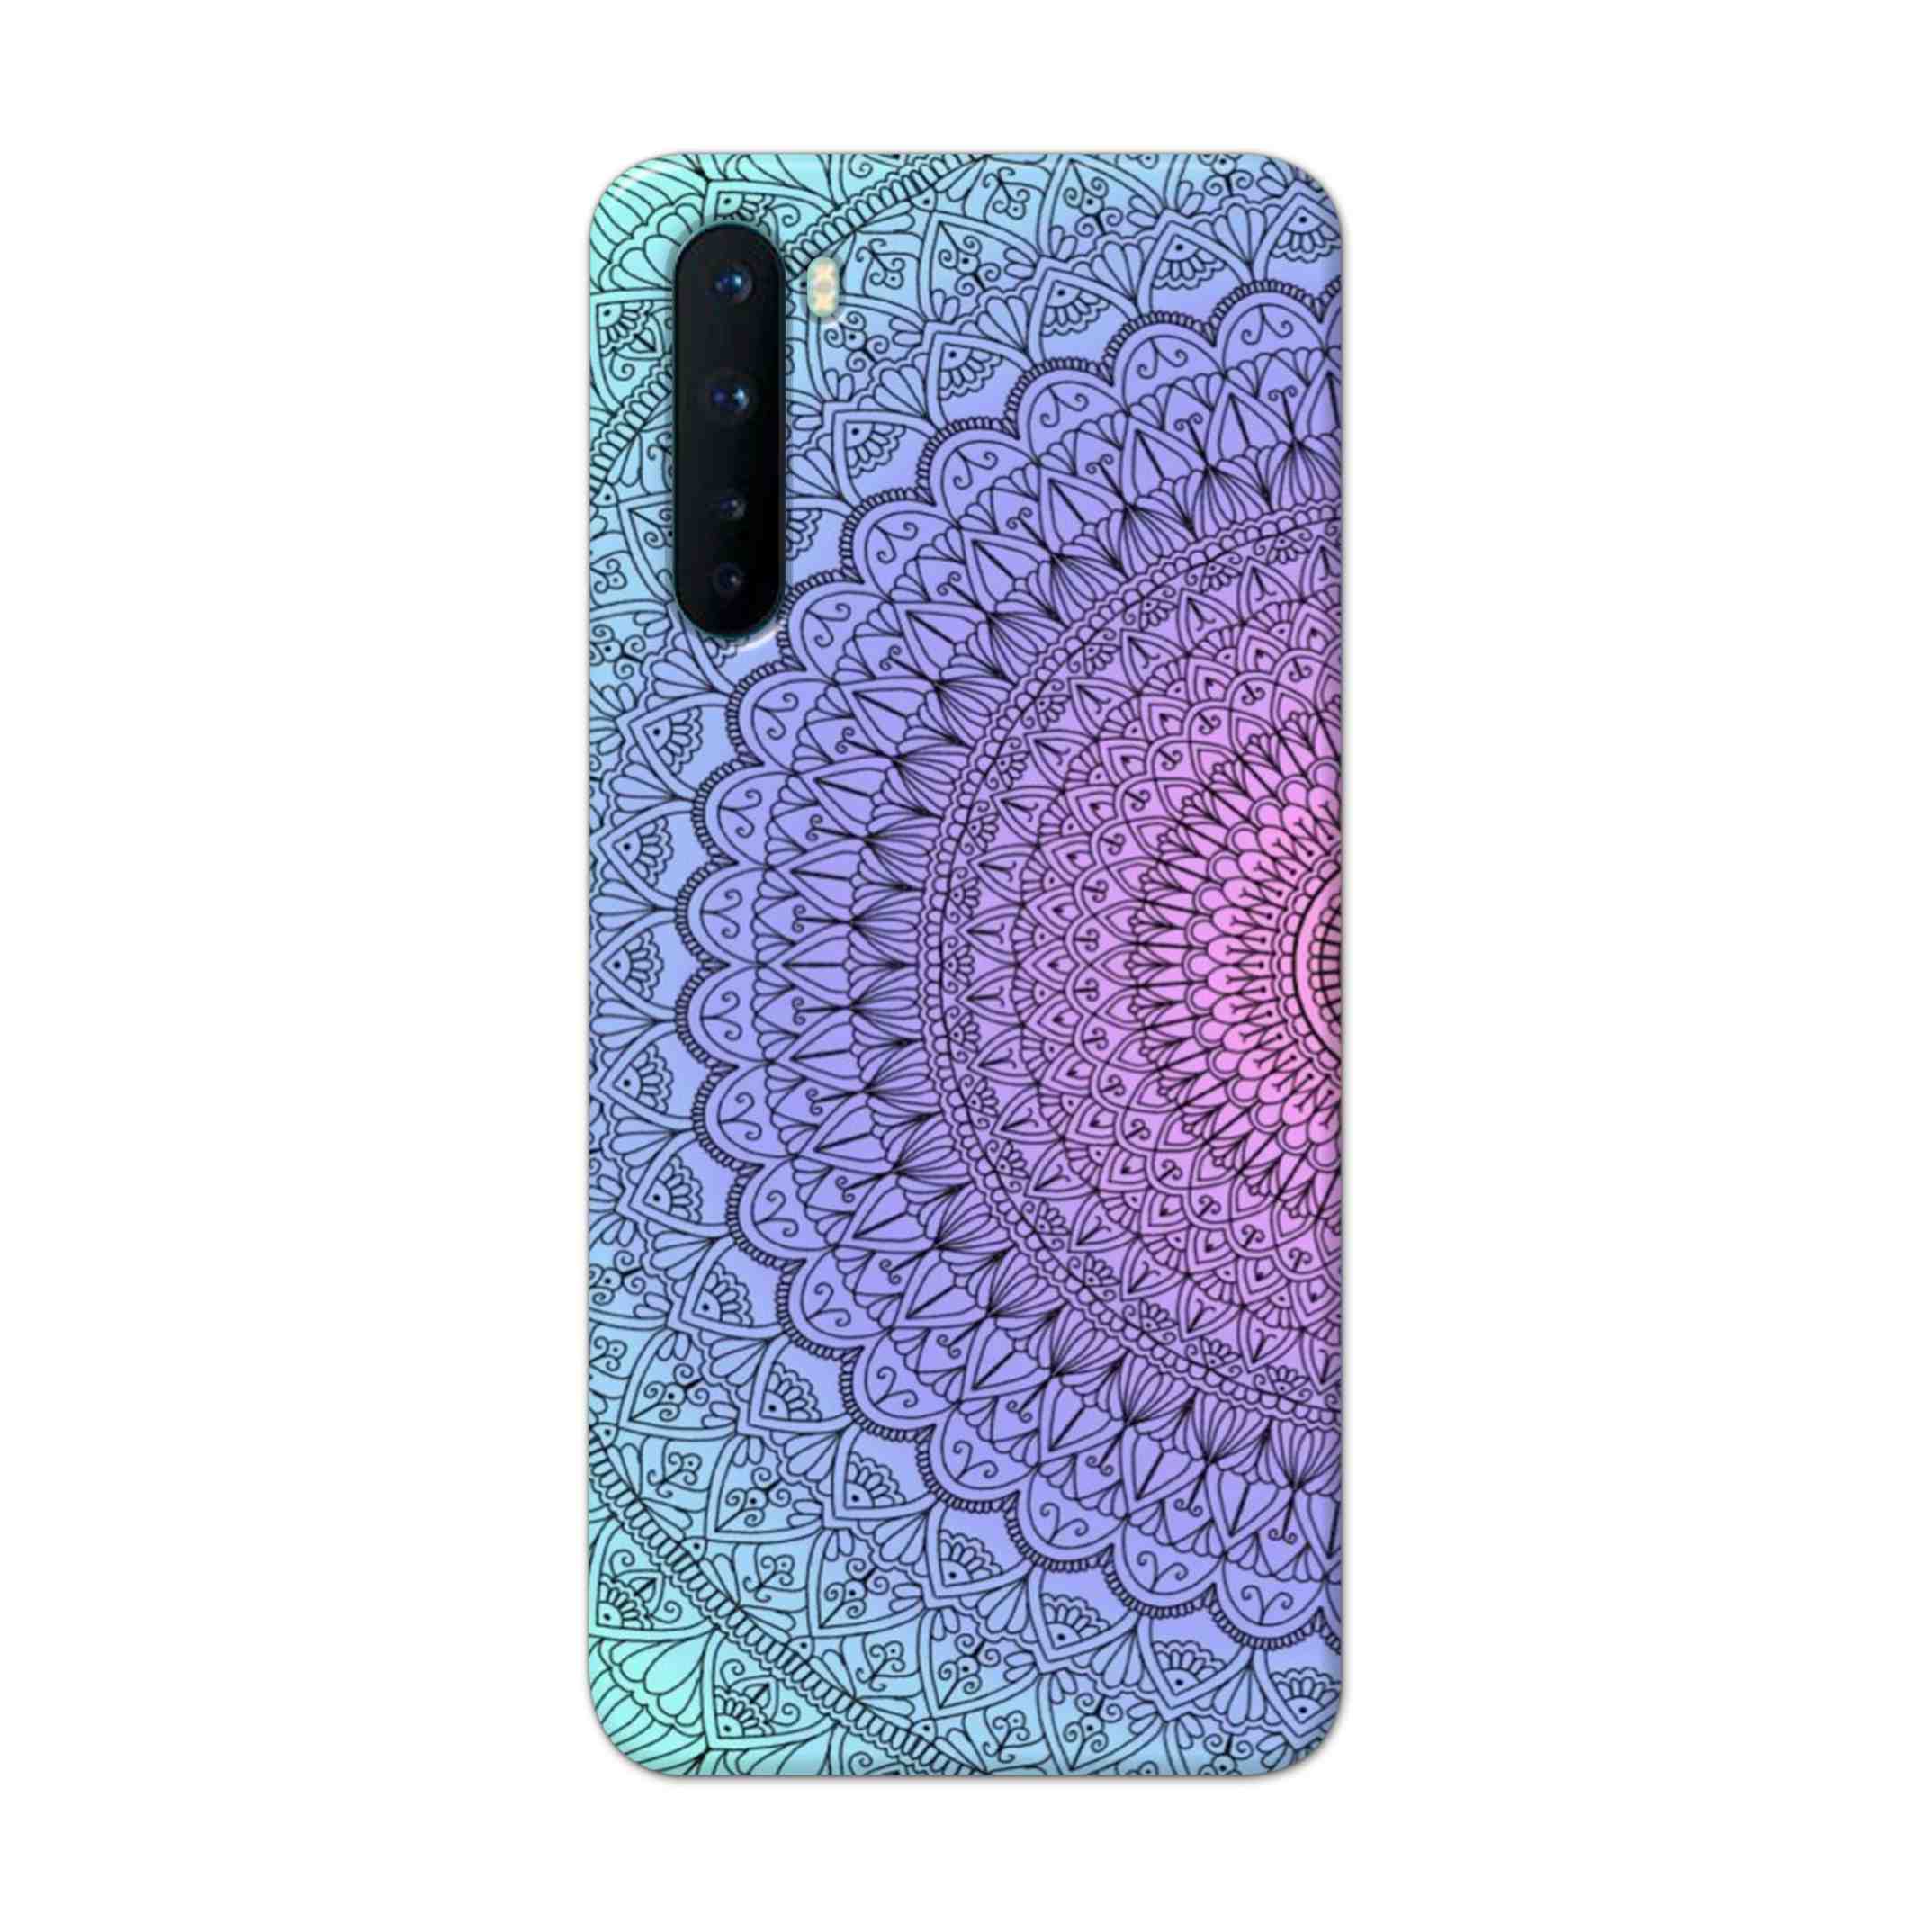 Buy Colourful Mandala Hard Back Mobile Phone Case Cover For OnePlus Nord Online